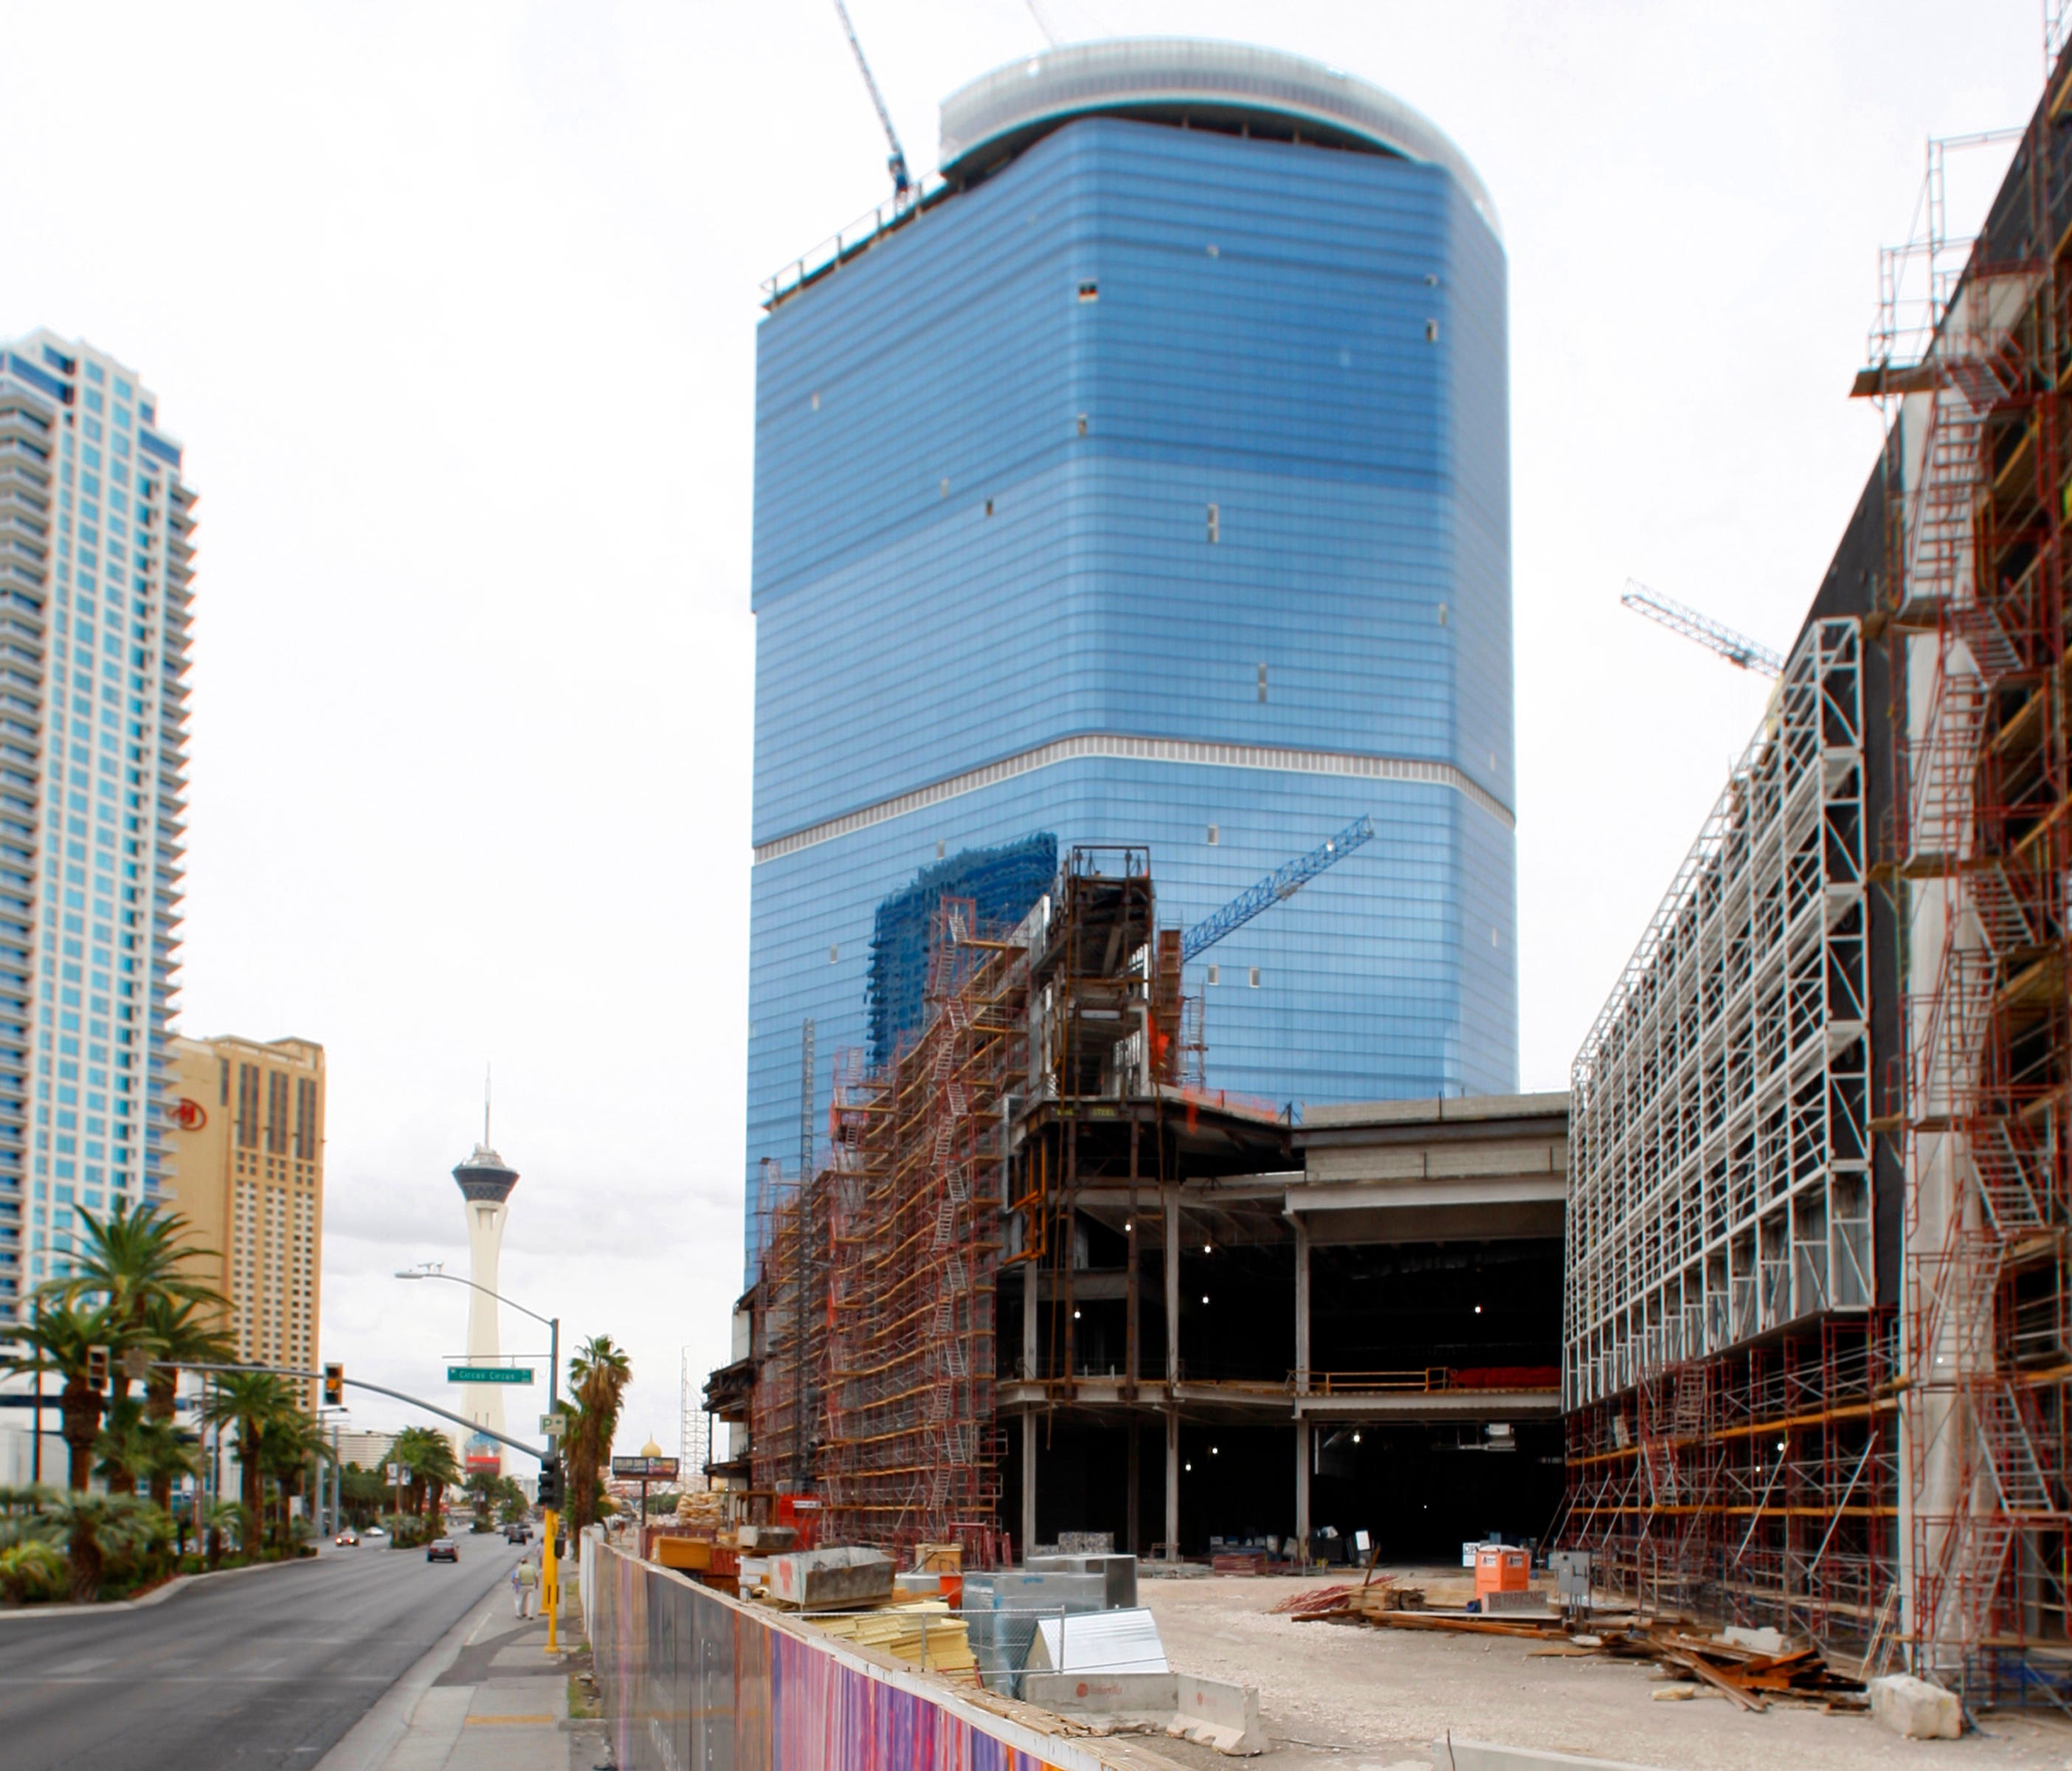 The Fontainebleau Las Vegas casino resort project in Las Vegas stalled in 2009 because of the recession. Marriott International will now take it over to open The Drew Las Vegas.